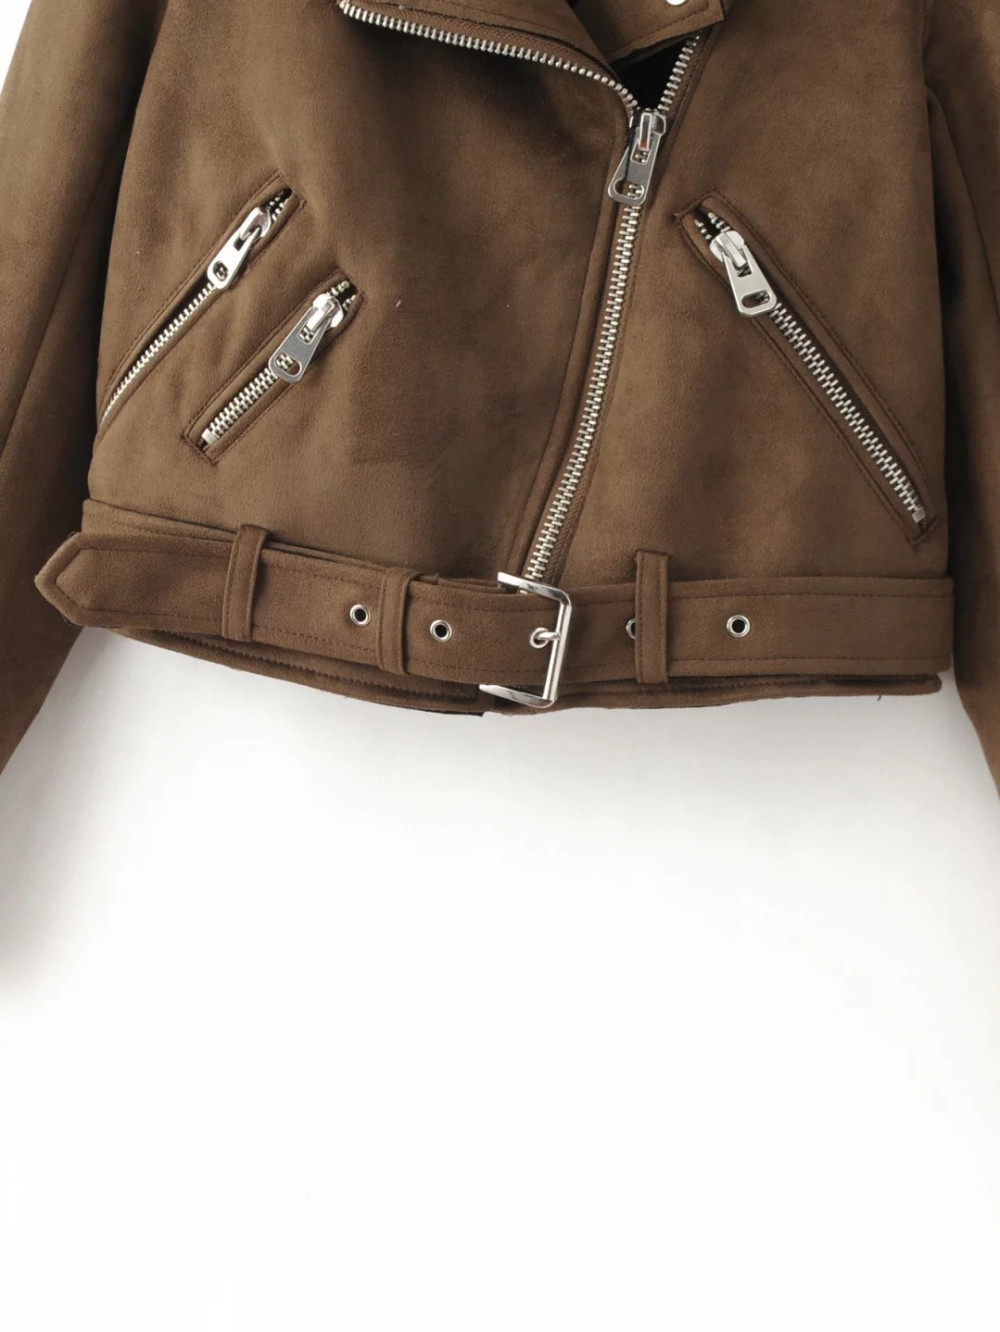 2016-Autumn-Fashion-Vintage-Rock-And-Roll-Zipper-Short-Brown-Faux-Suede-Jacket-Women-Basic-Coats-Out-32738340622